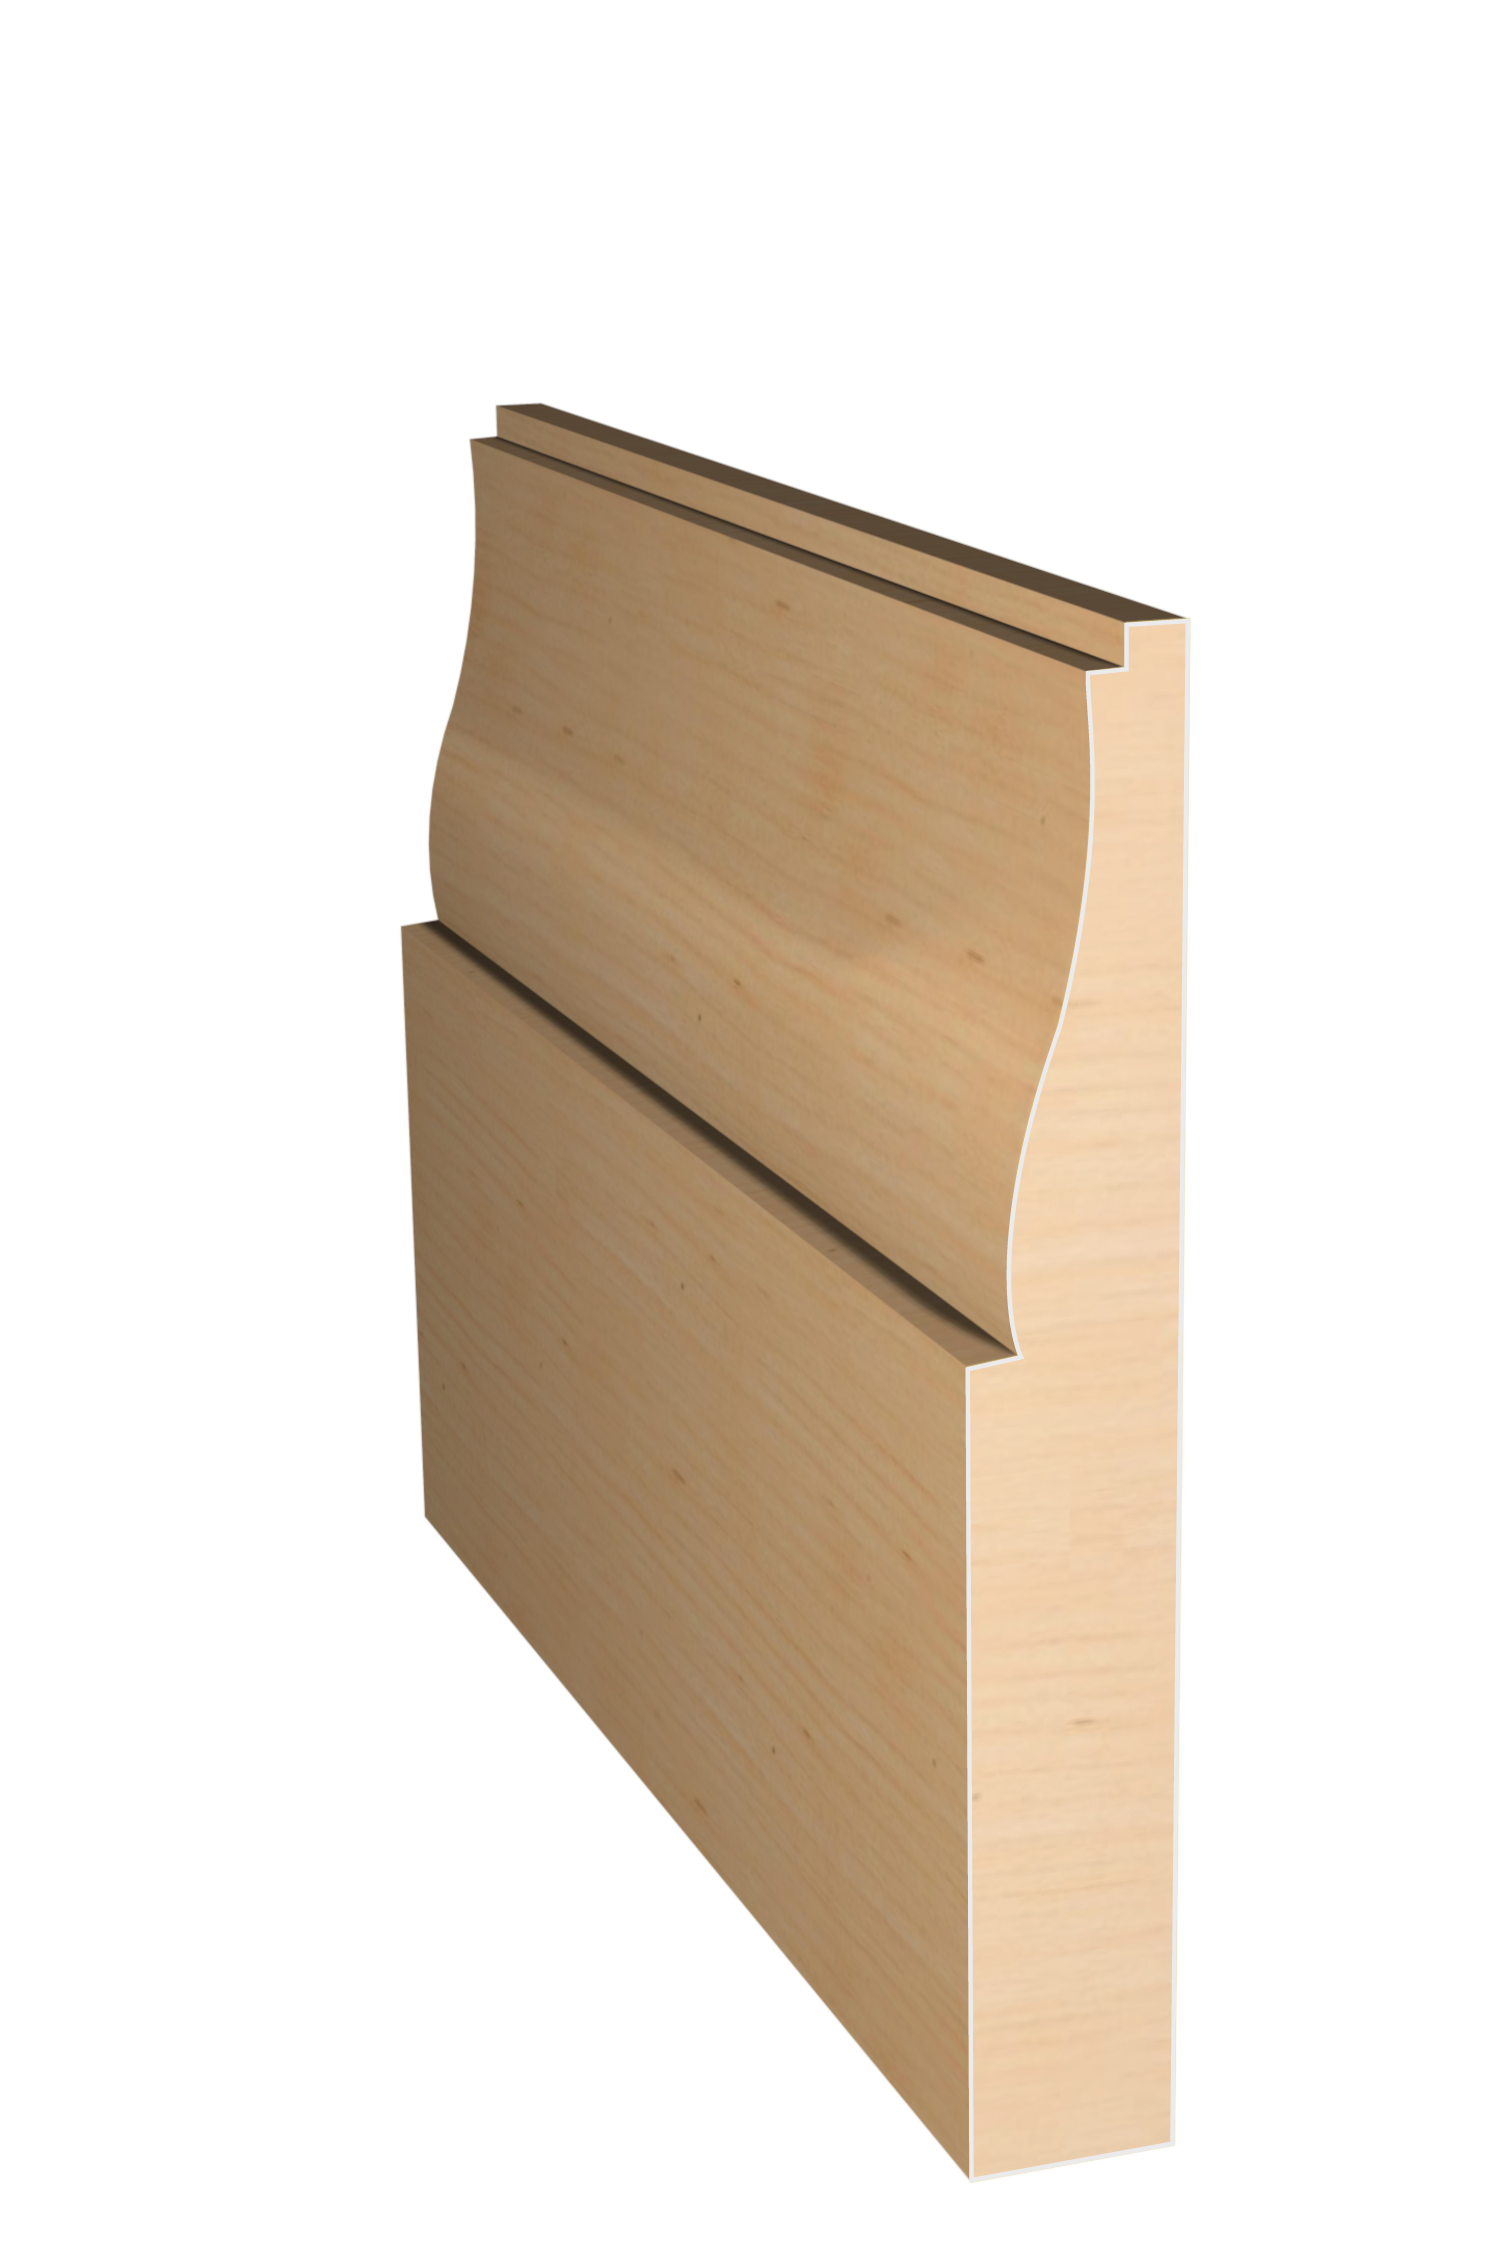 Three dimensional rendering of custom base wood molding BAPL4381 made by Public Lumber Company in Detroit.